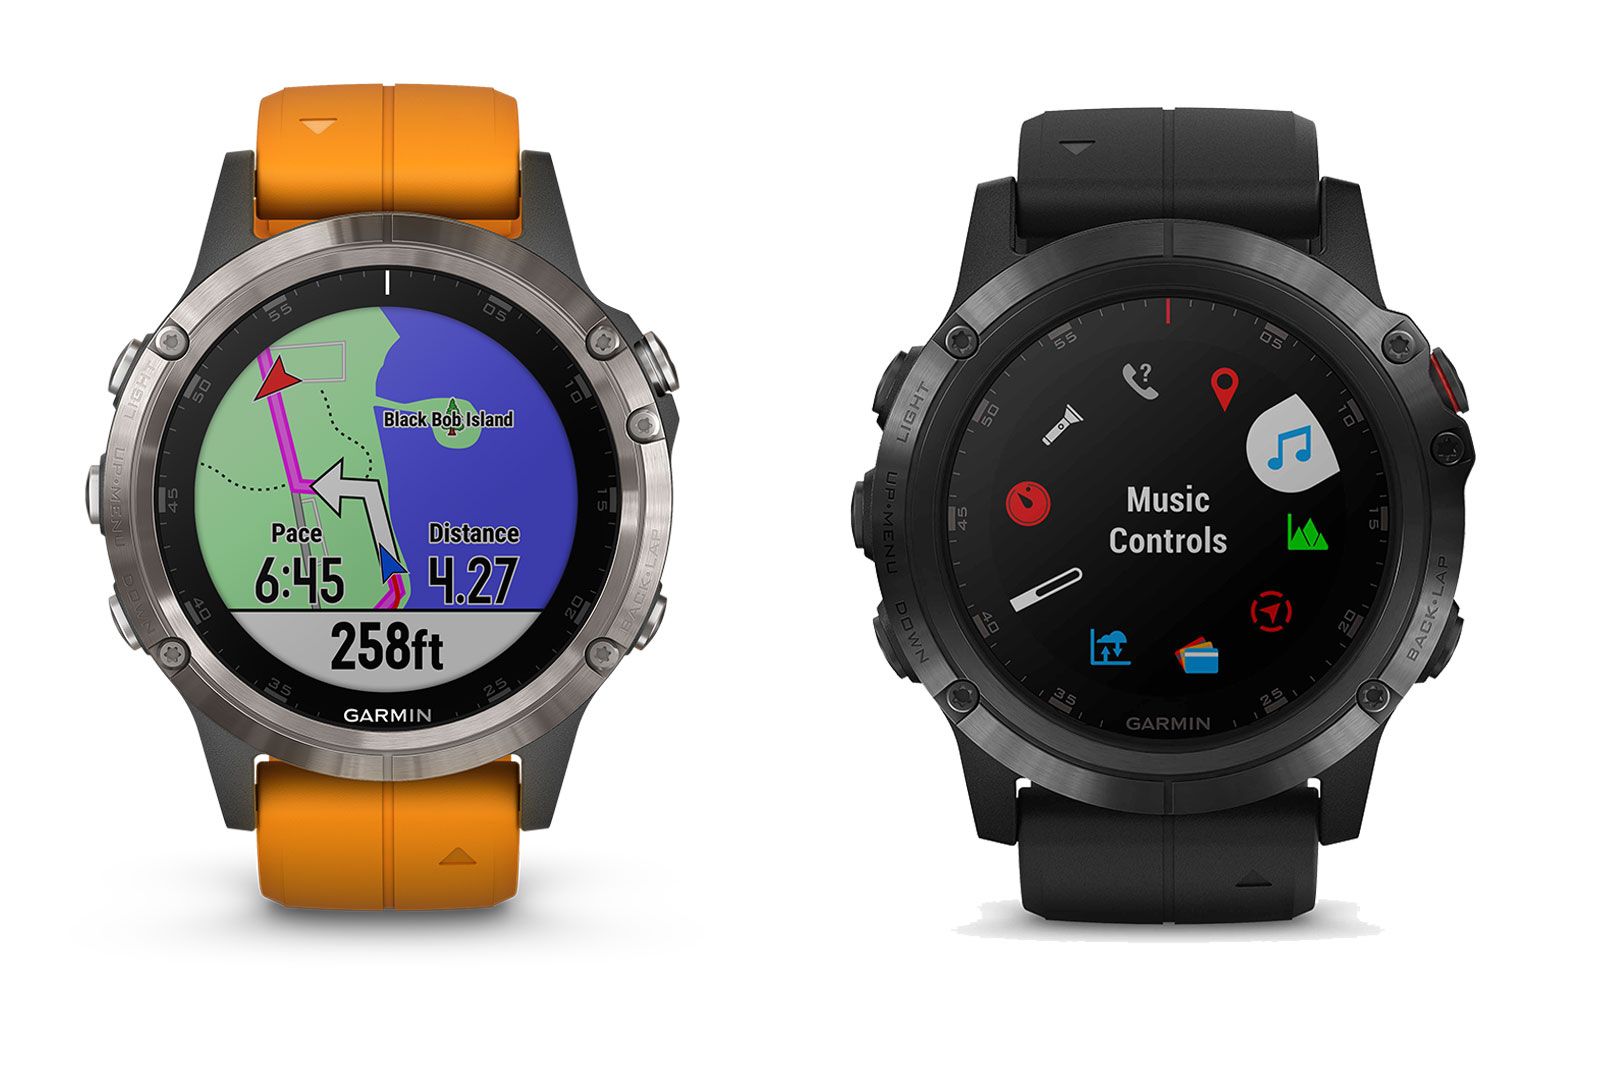 Garmin introduces Fenix 5 Plus models with plenty of new features including Garmin Pay image 1